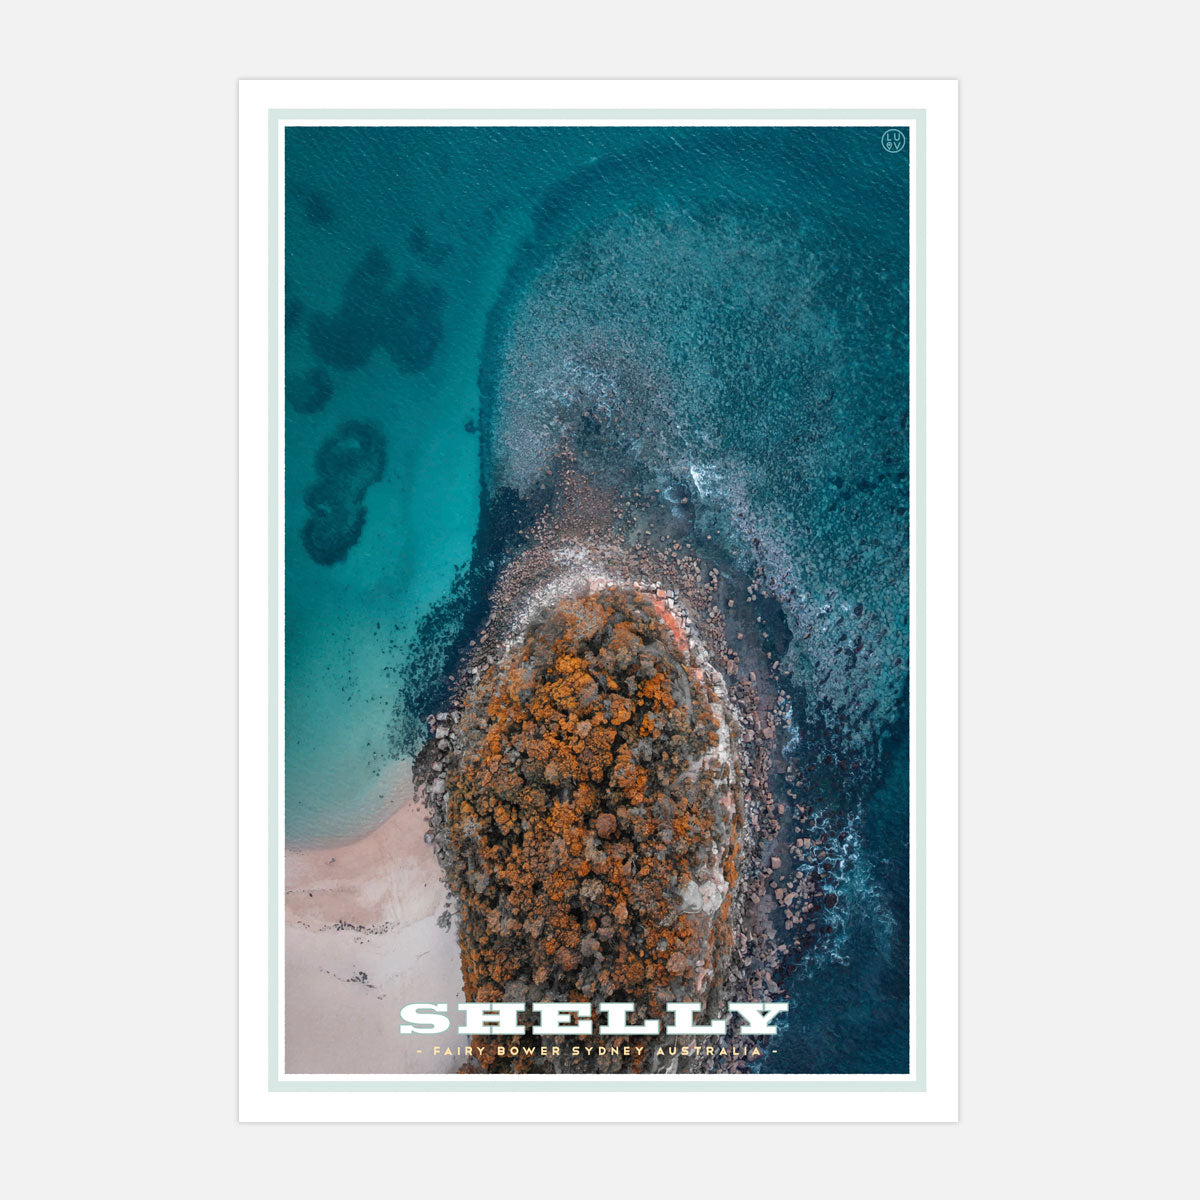 Shelly Beach headland vintage travel print by Places We Luv